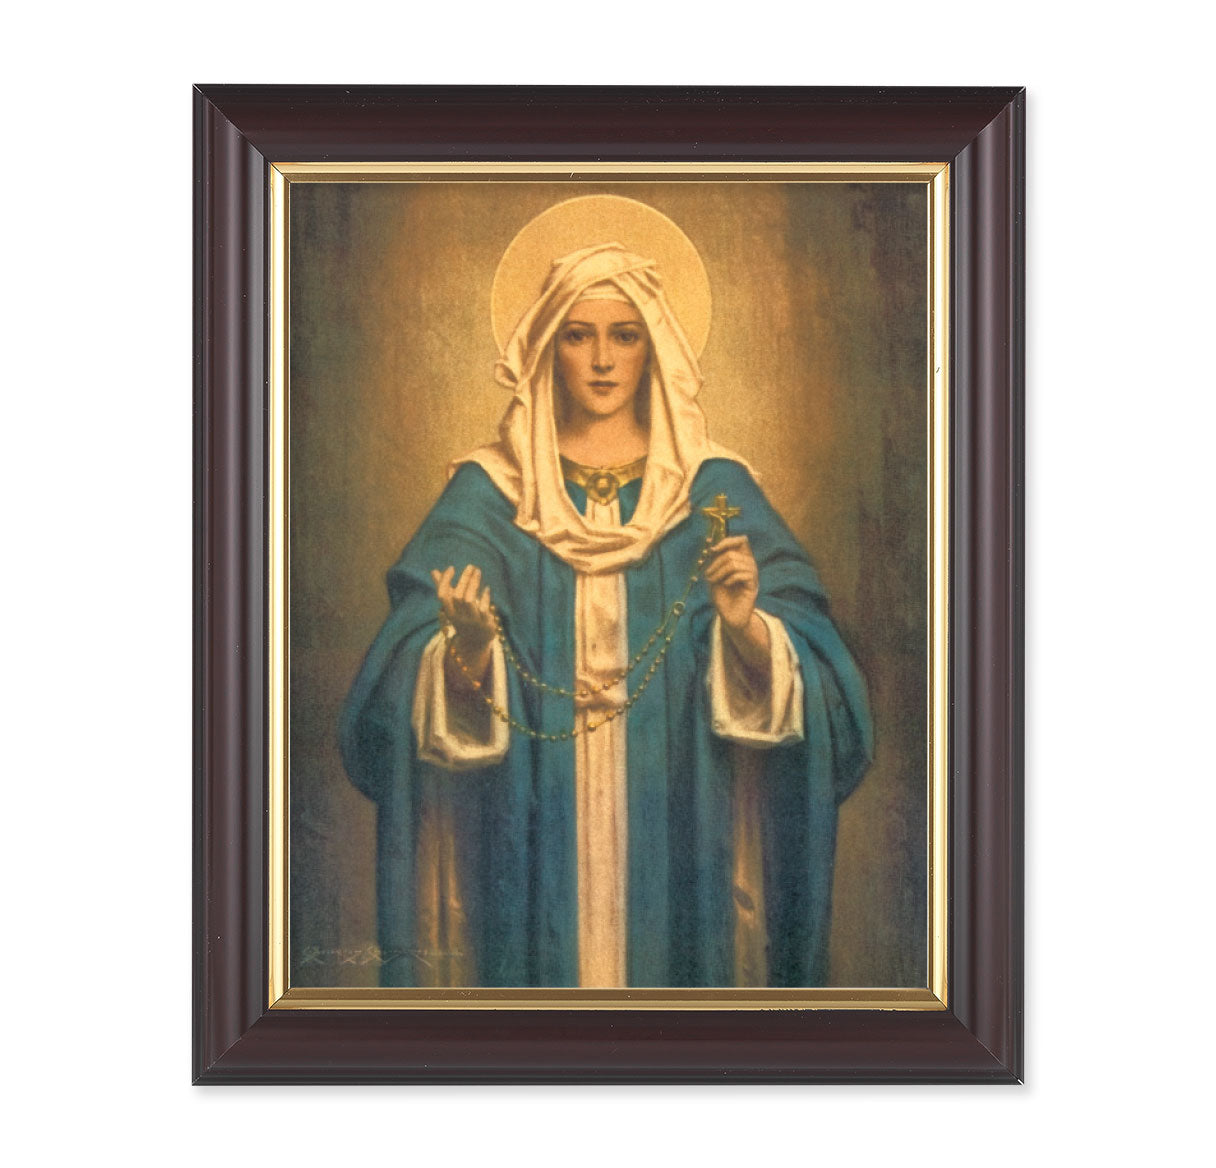 Our Lady of the Rosary Walnut Framed Art